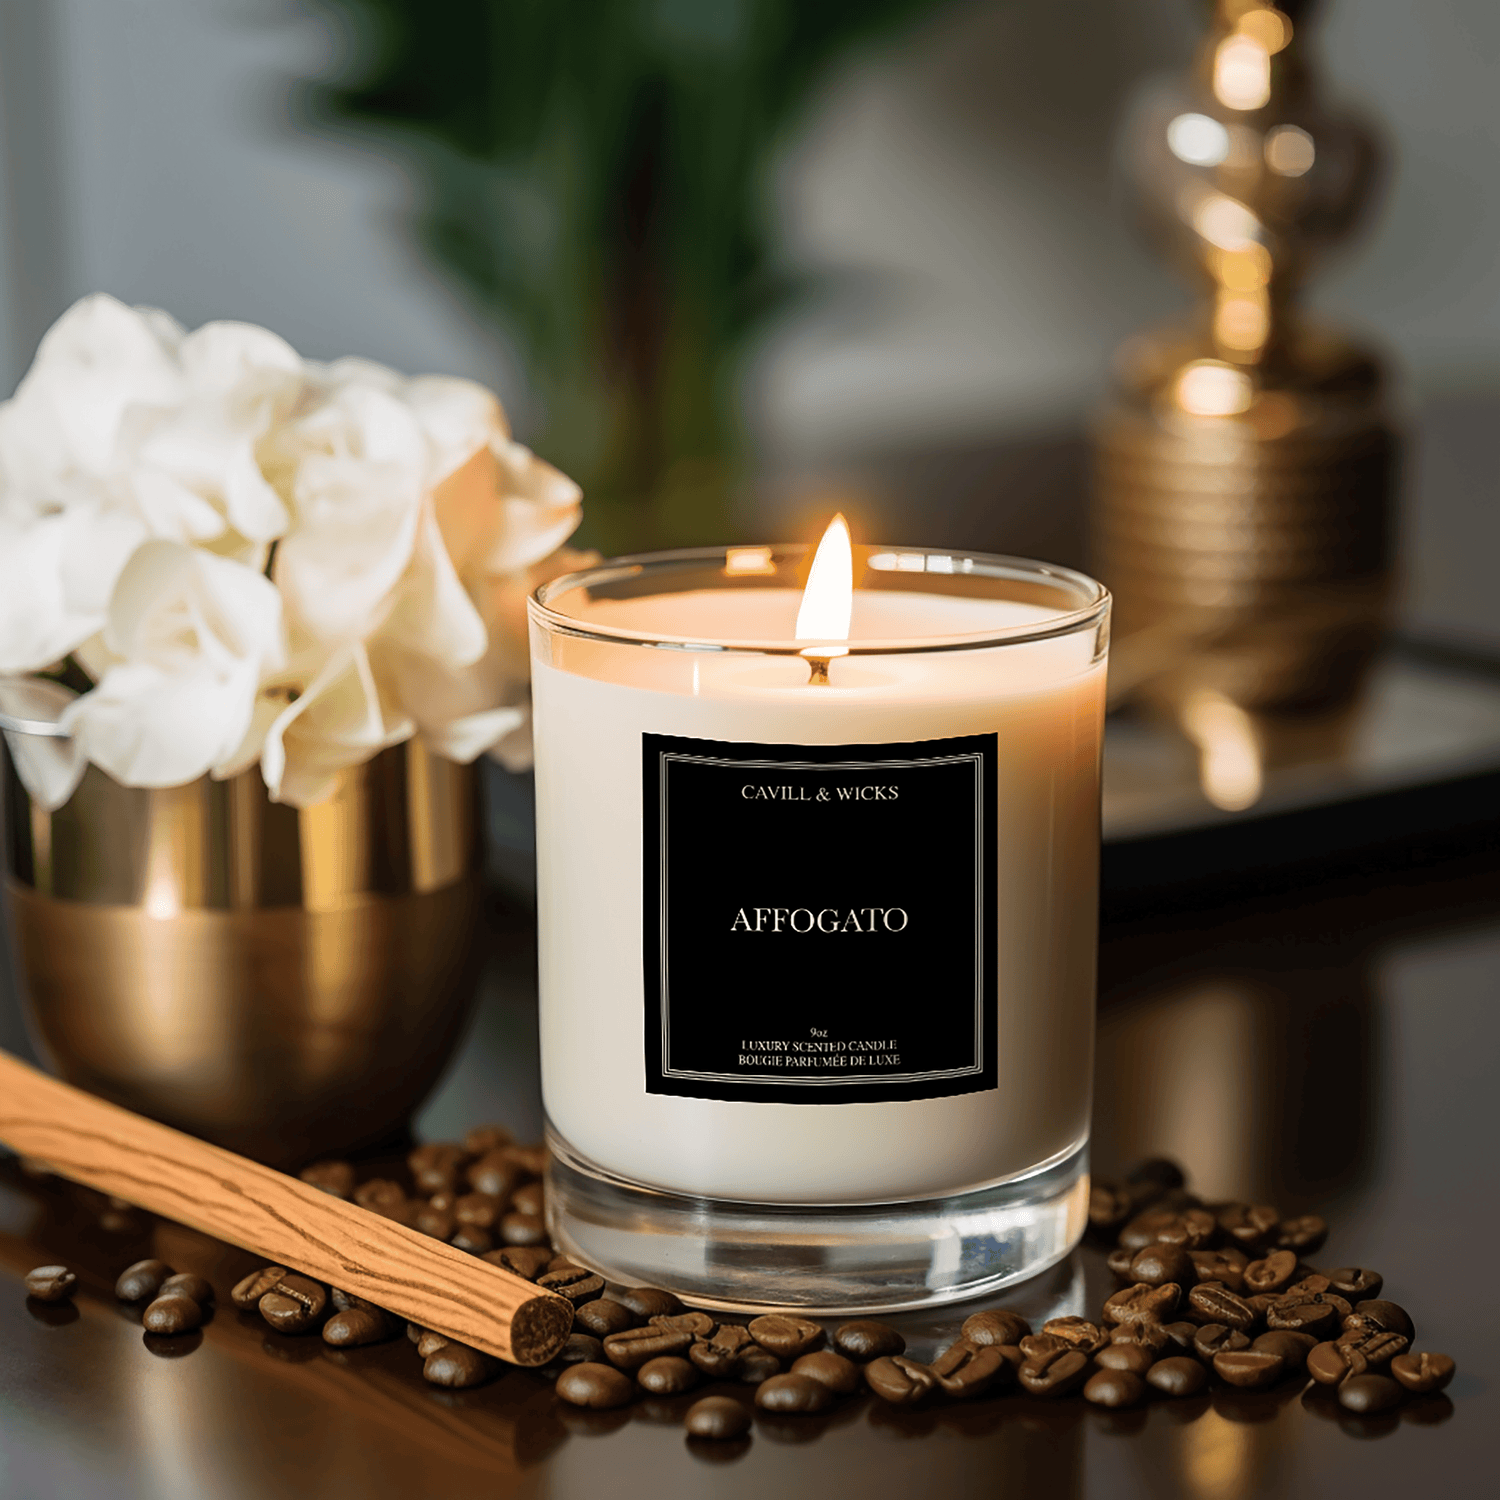 Cavill & Wicks Candle Co.